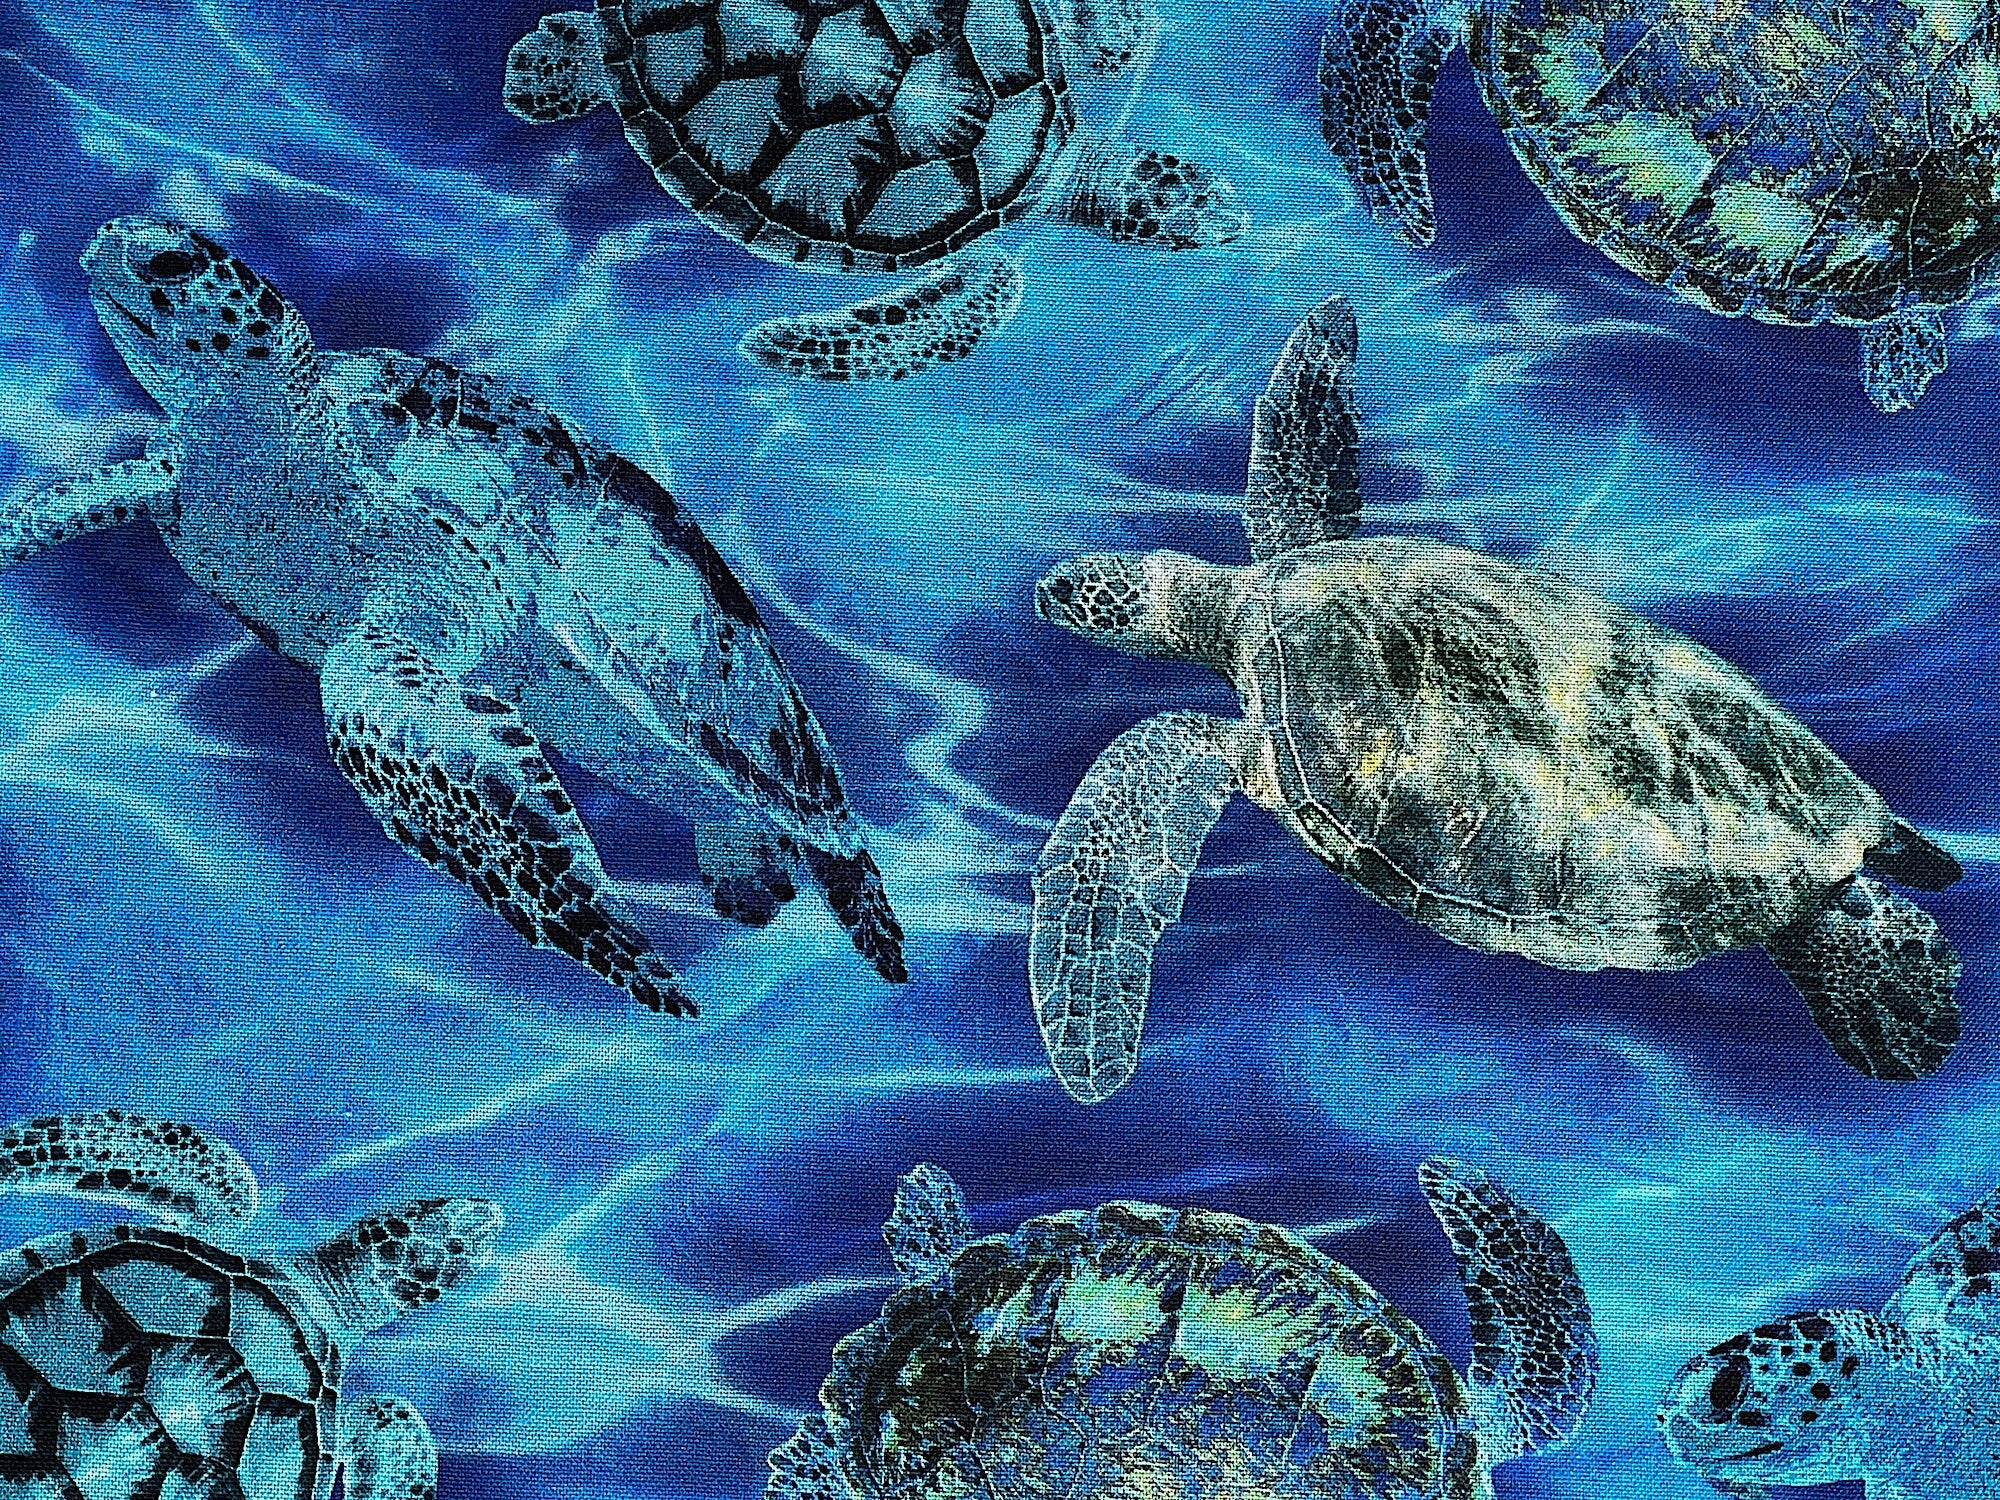 Close up of turtles swimming int the sea.